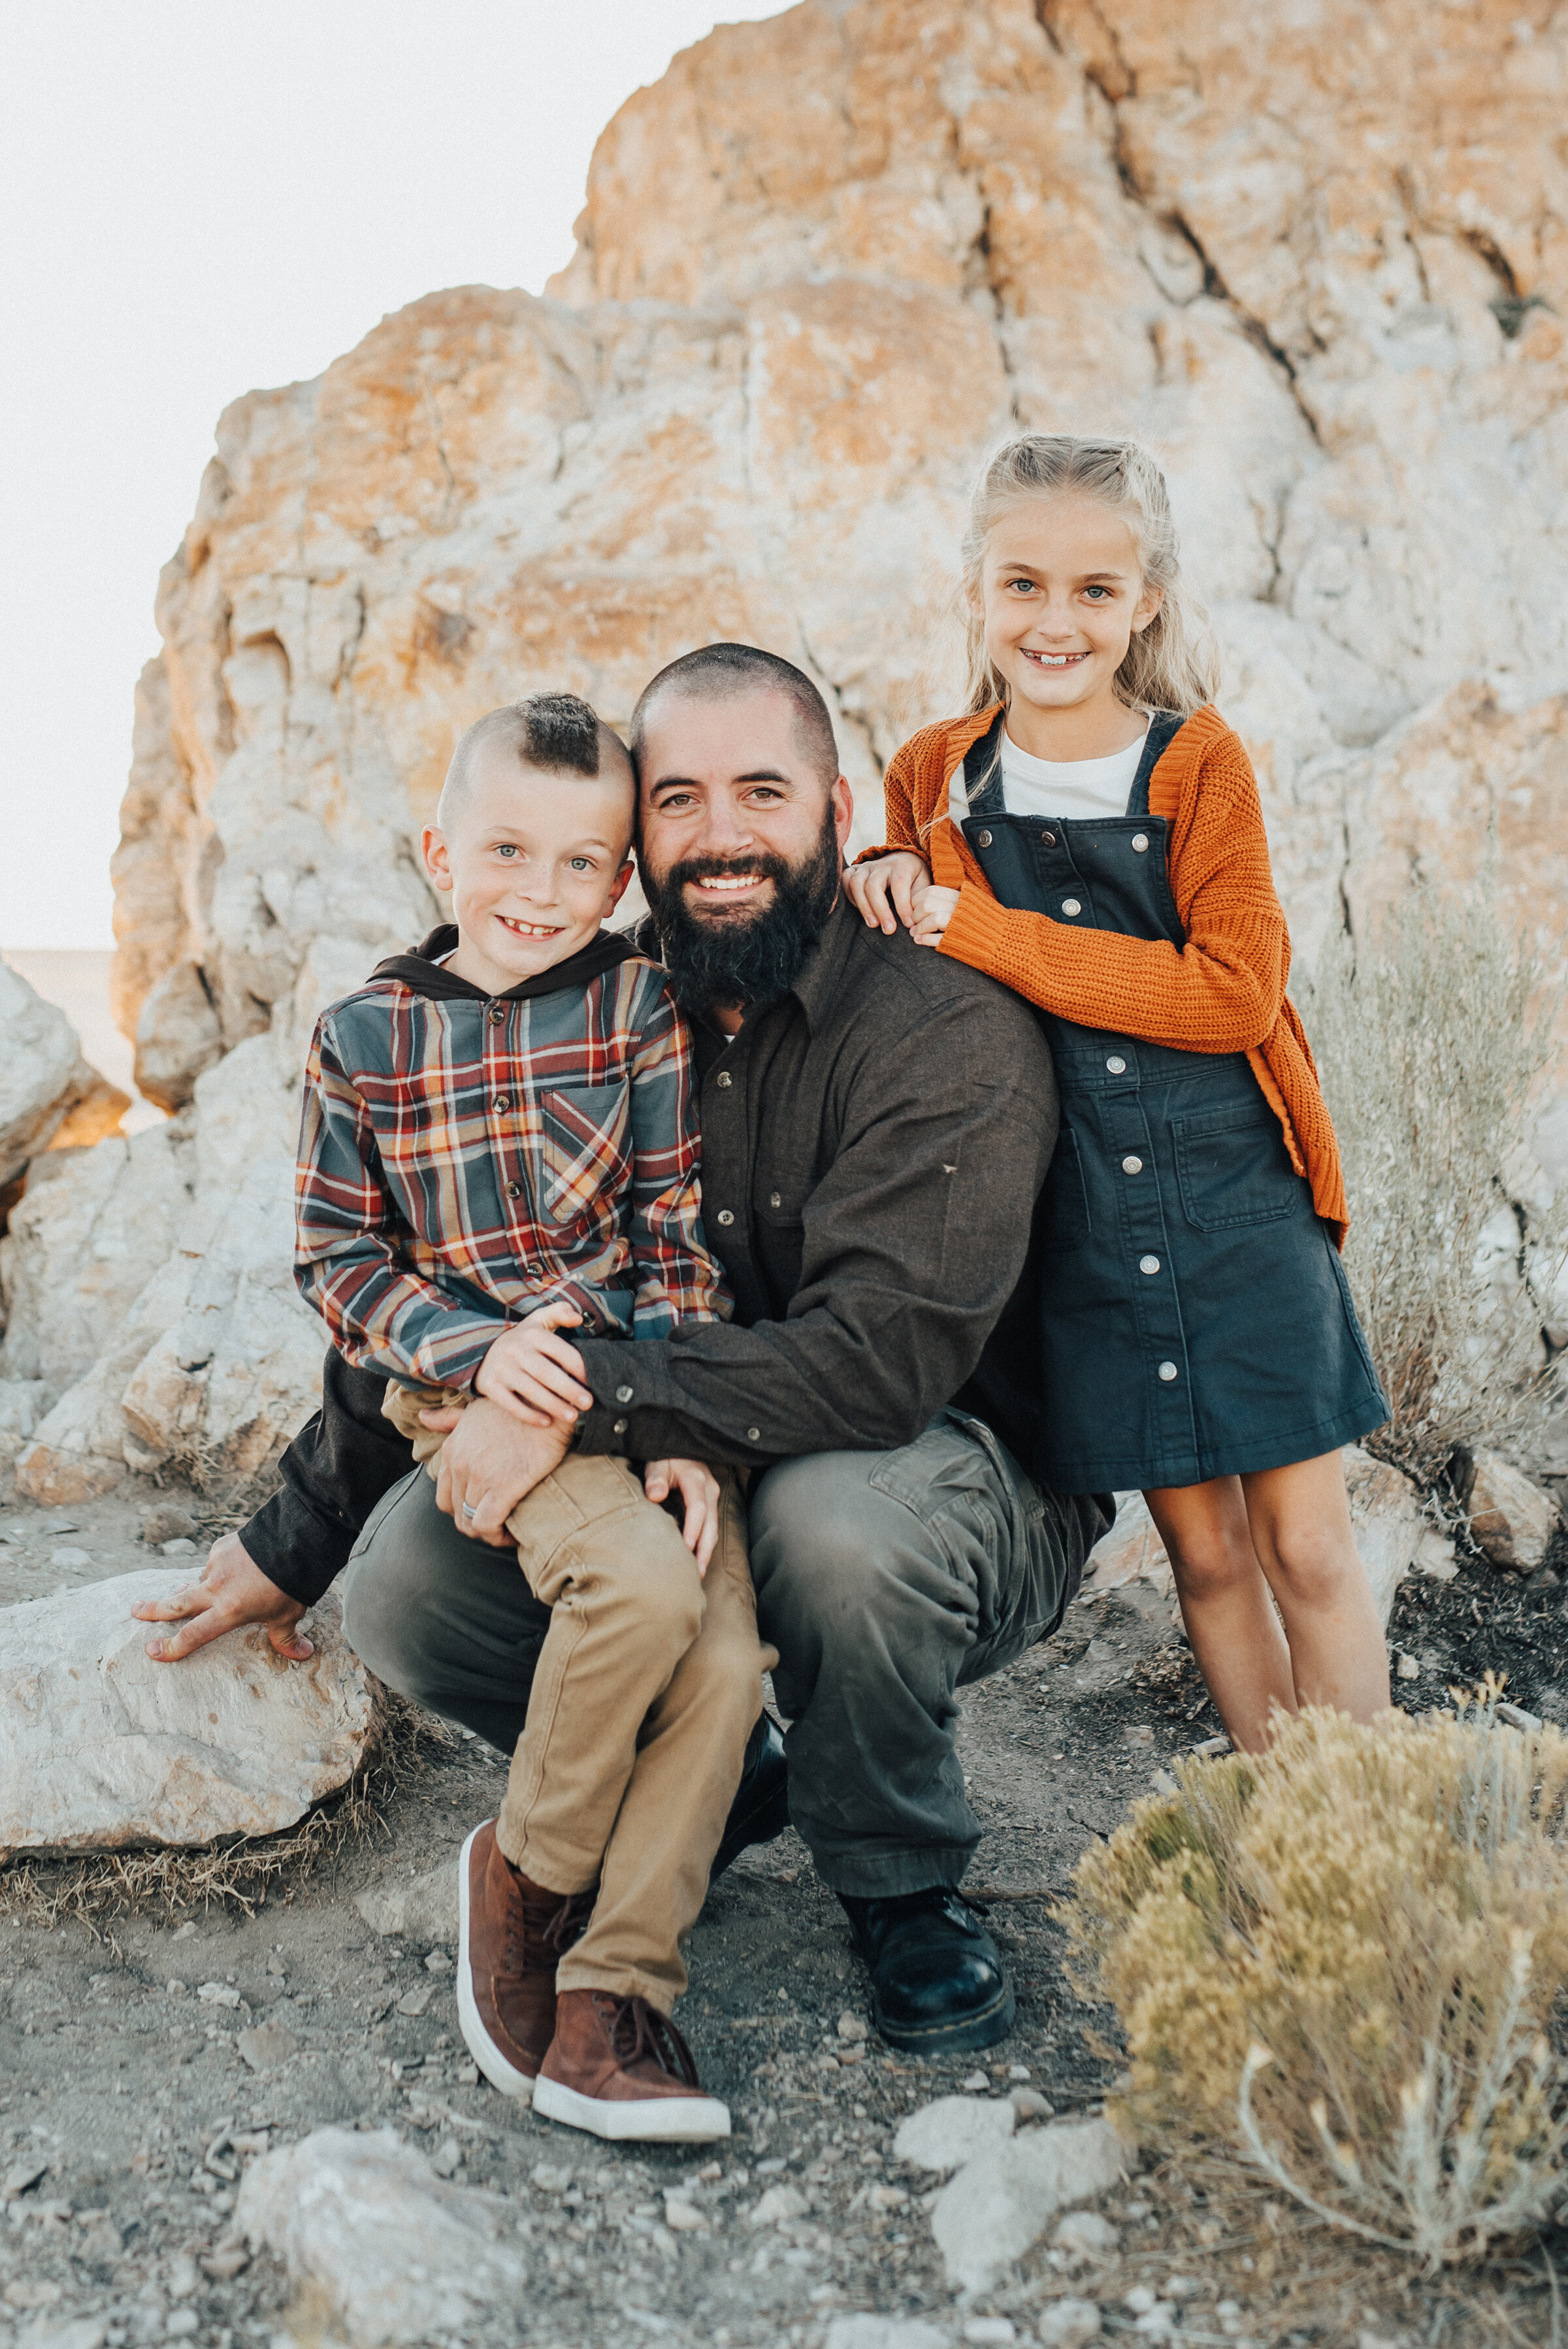  A darling father and his son and daughter sit together in the rocks of Antelope Island in a professional family photo shoot. Professional Utah photographer Kristi Alyse Photography father and his children outdoor fall outfit inspiration family goals phohawk family pose inspiration ideas and goals outfit inspo #familypictures #utahphotographer #antelopeisland #outfitinspo #familypics #familyphotographer #pinkhair #saltlakecityphotog #slcfamilypictures 